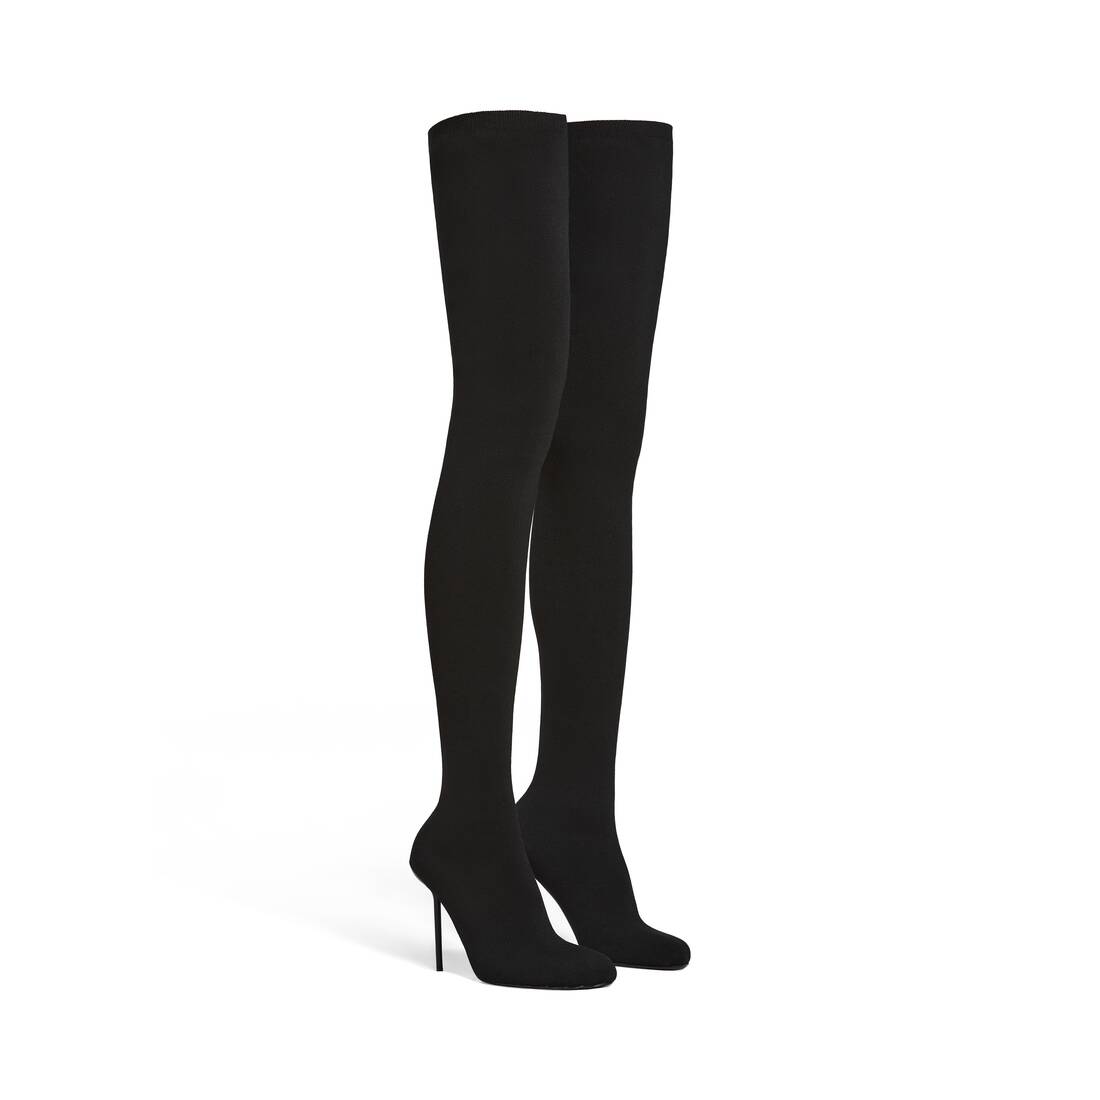 Women's Anatomic 110mm Over-the-knee Boot in Black